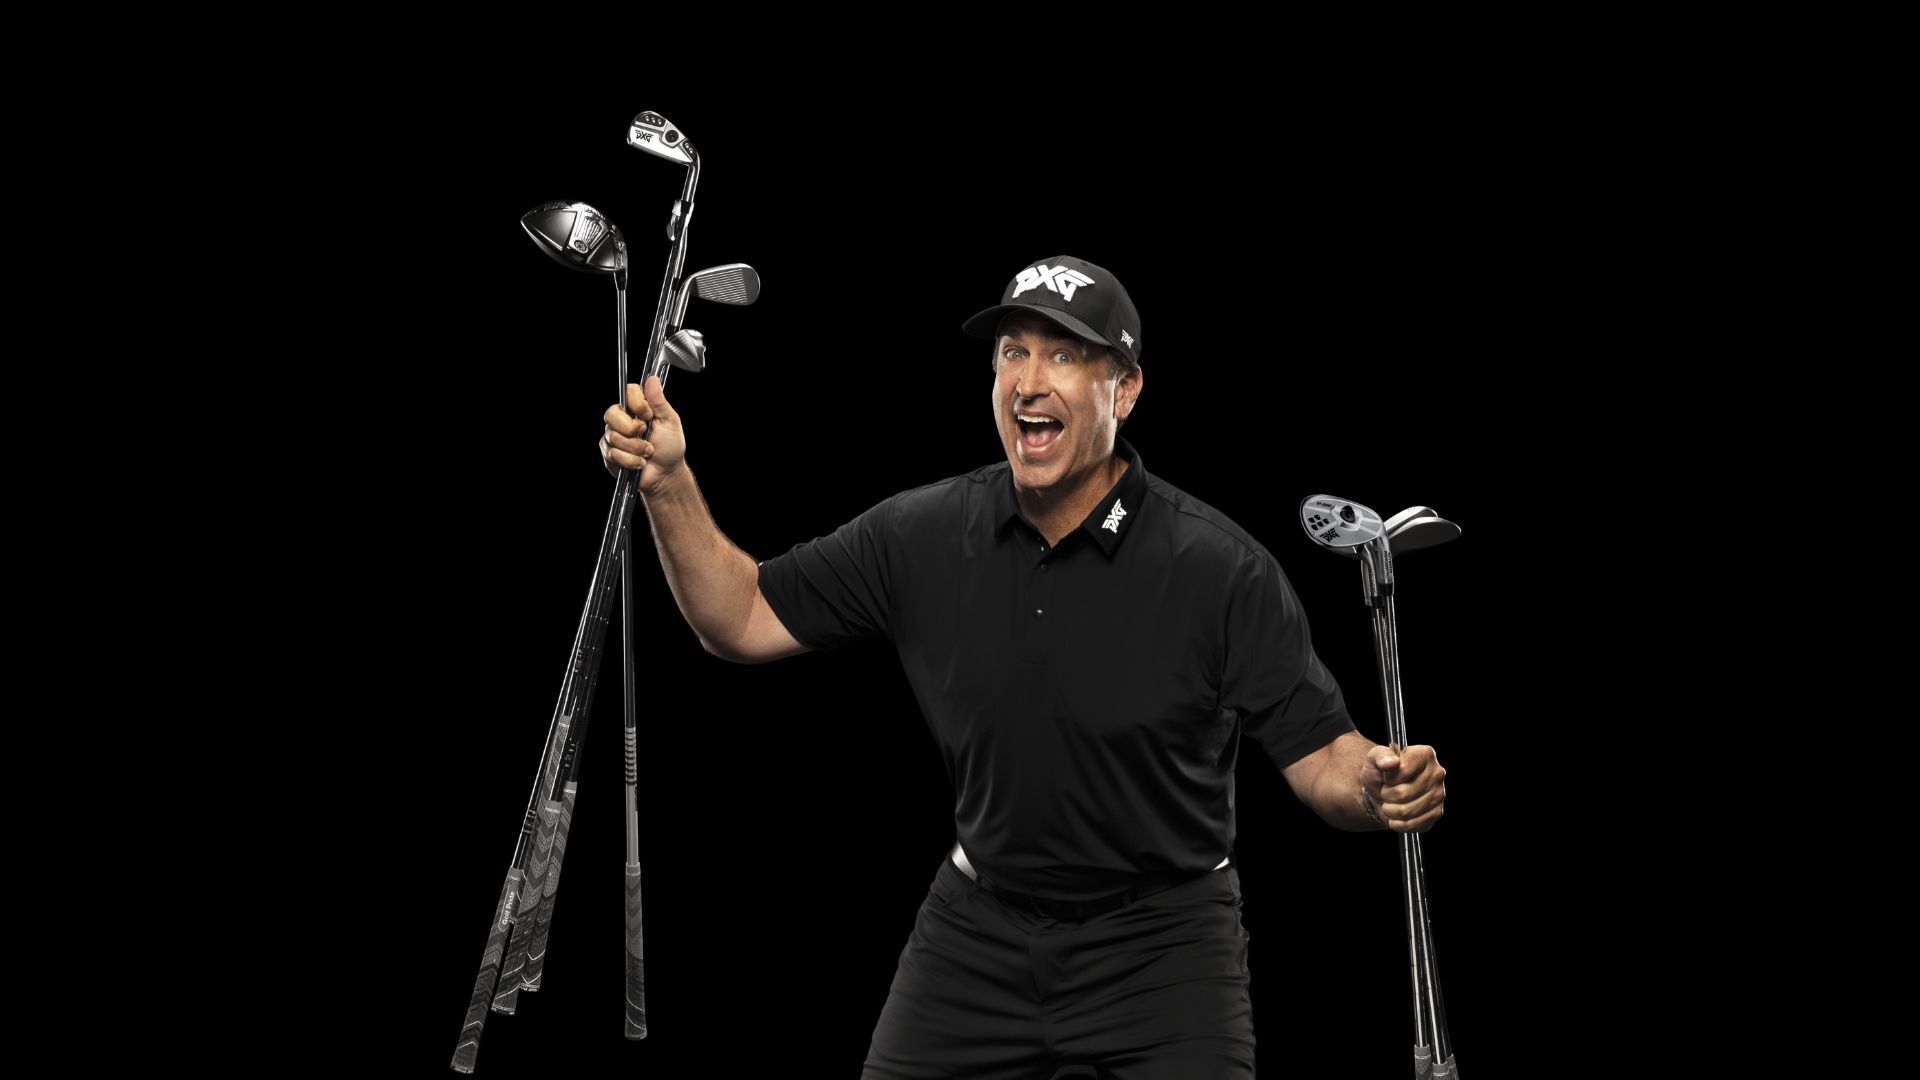 Rob riggle holding many golf clubs